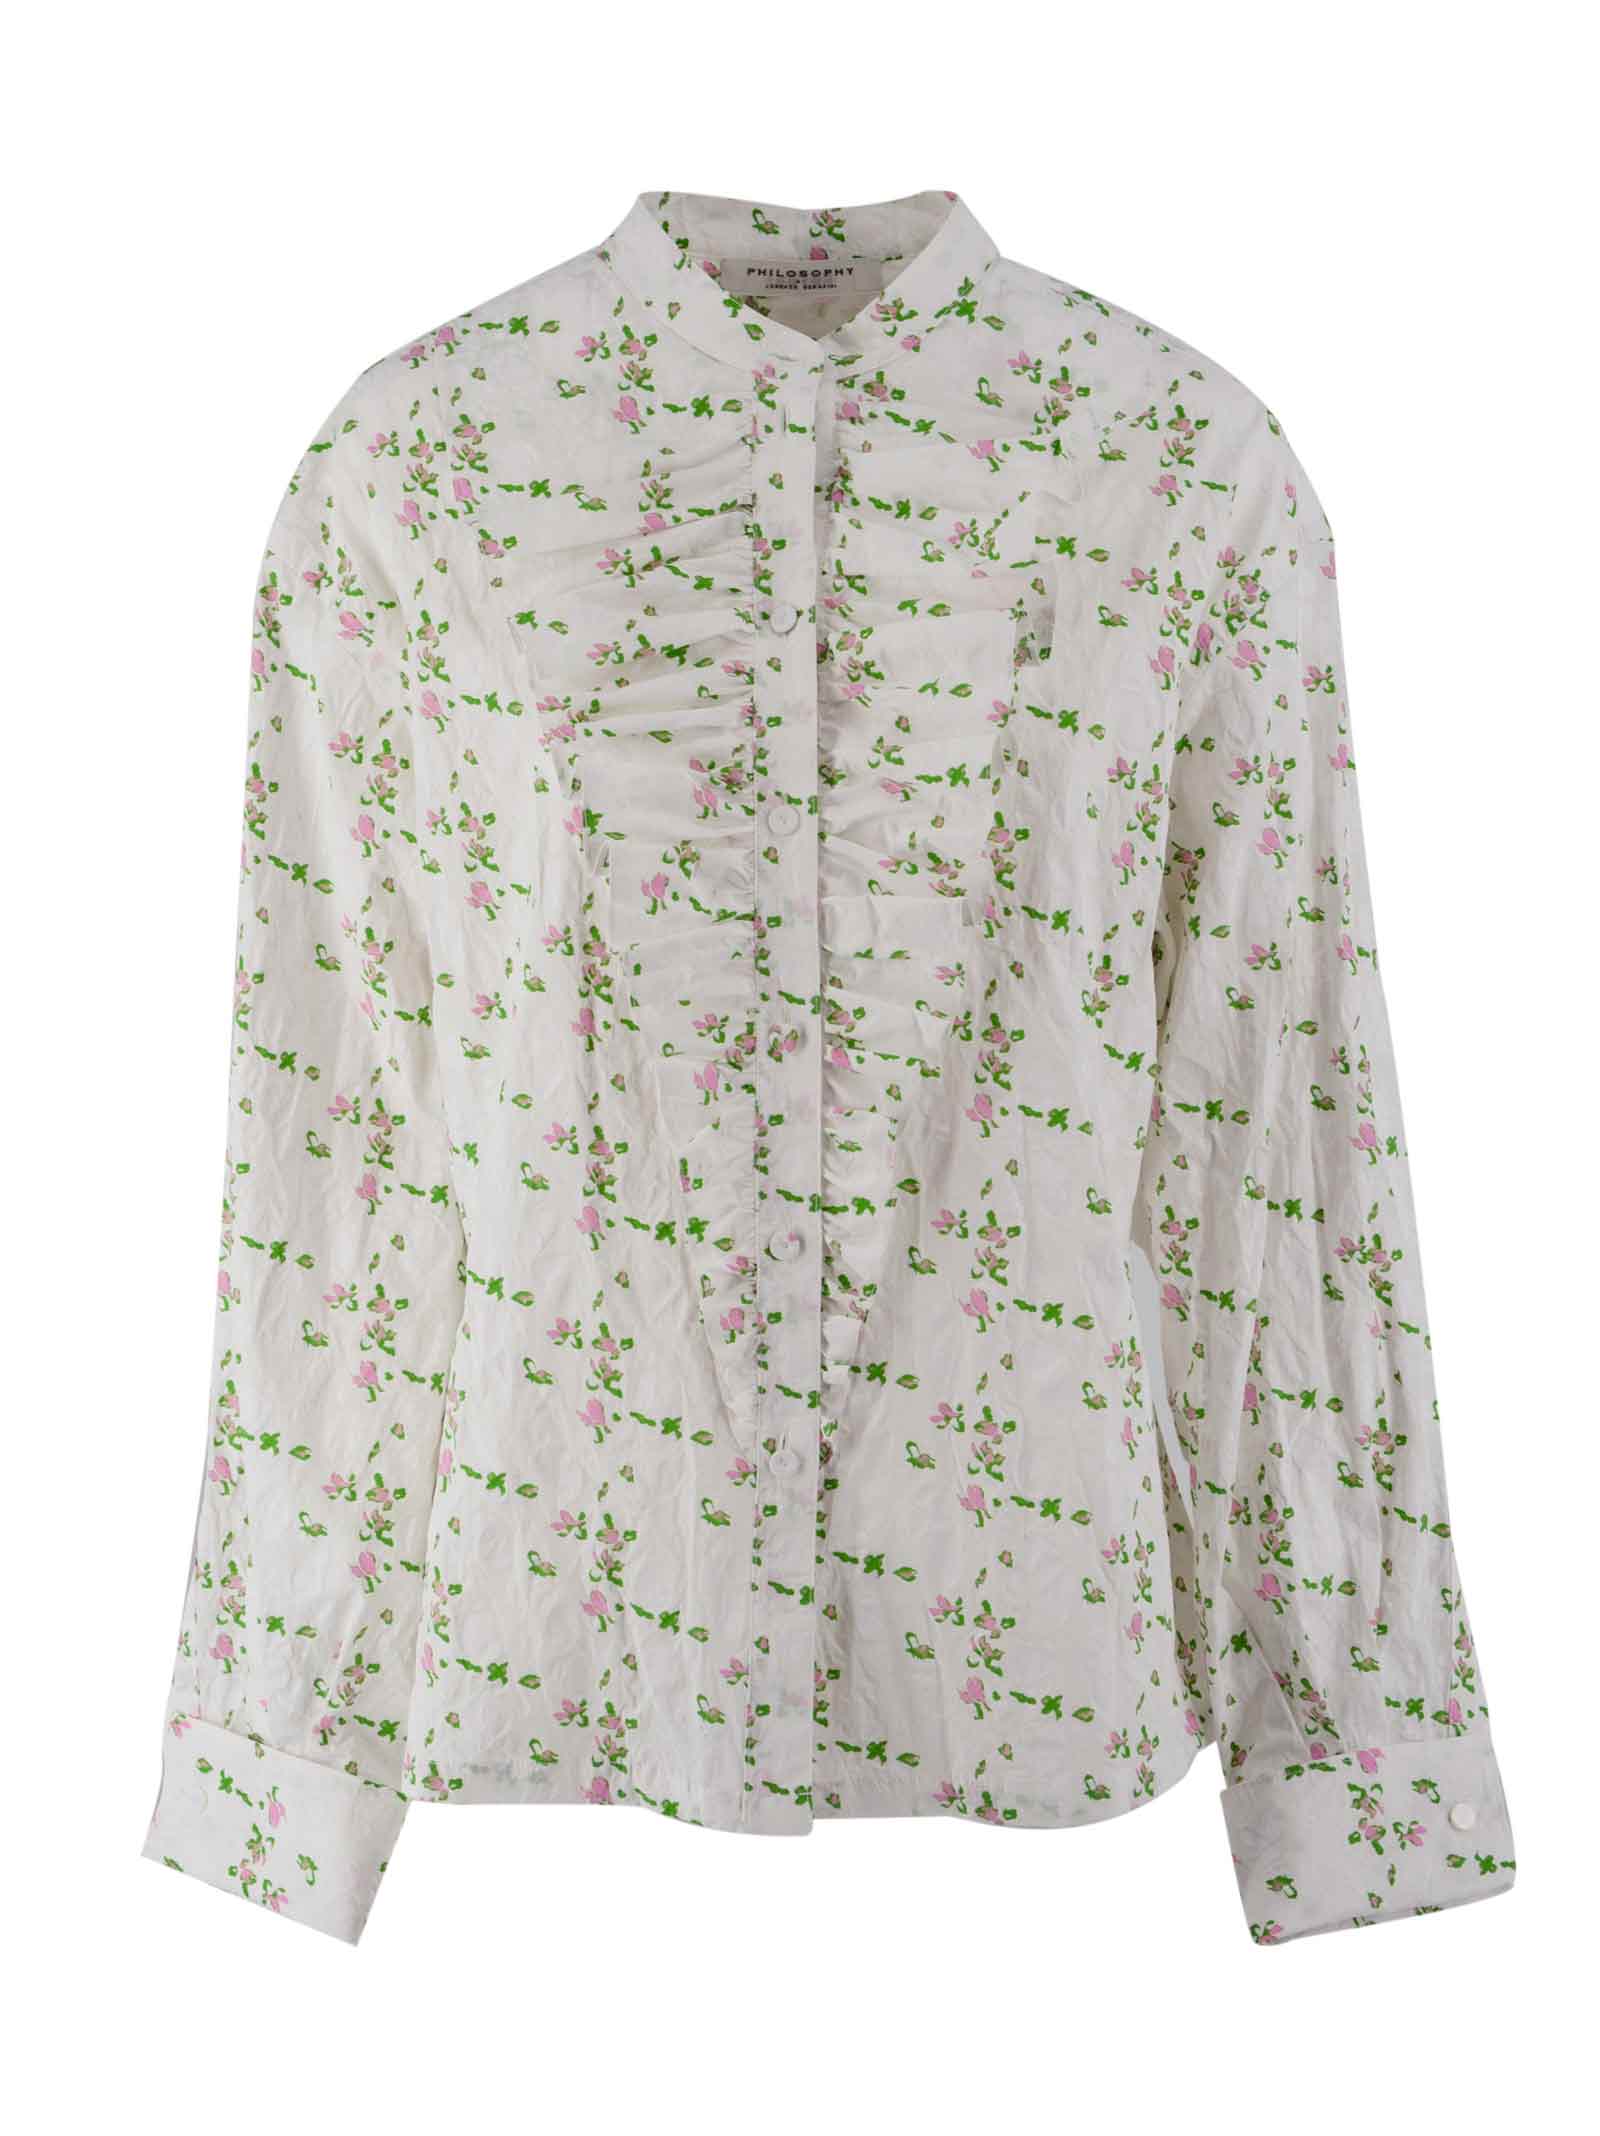 Philosophy di Lorenzo Serafini All-over Floral Print, Plunging V-neck Shirt